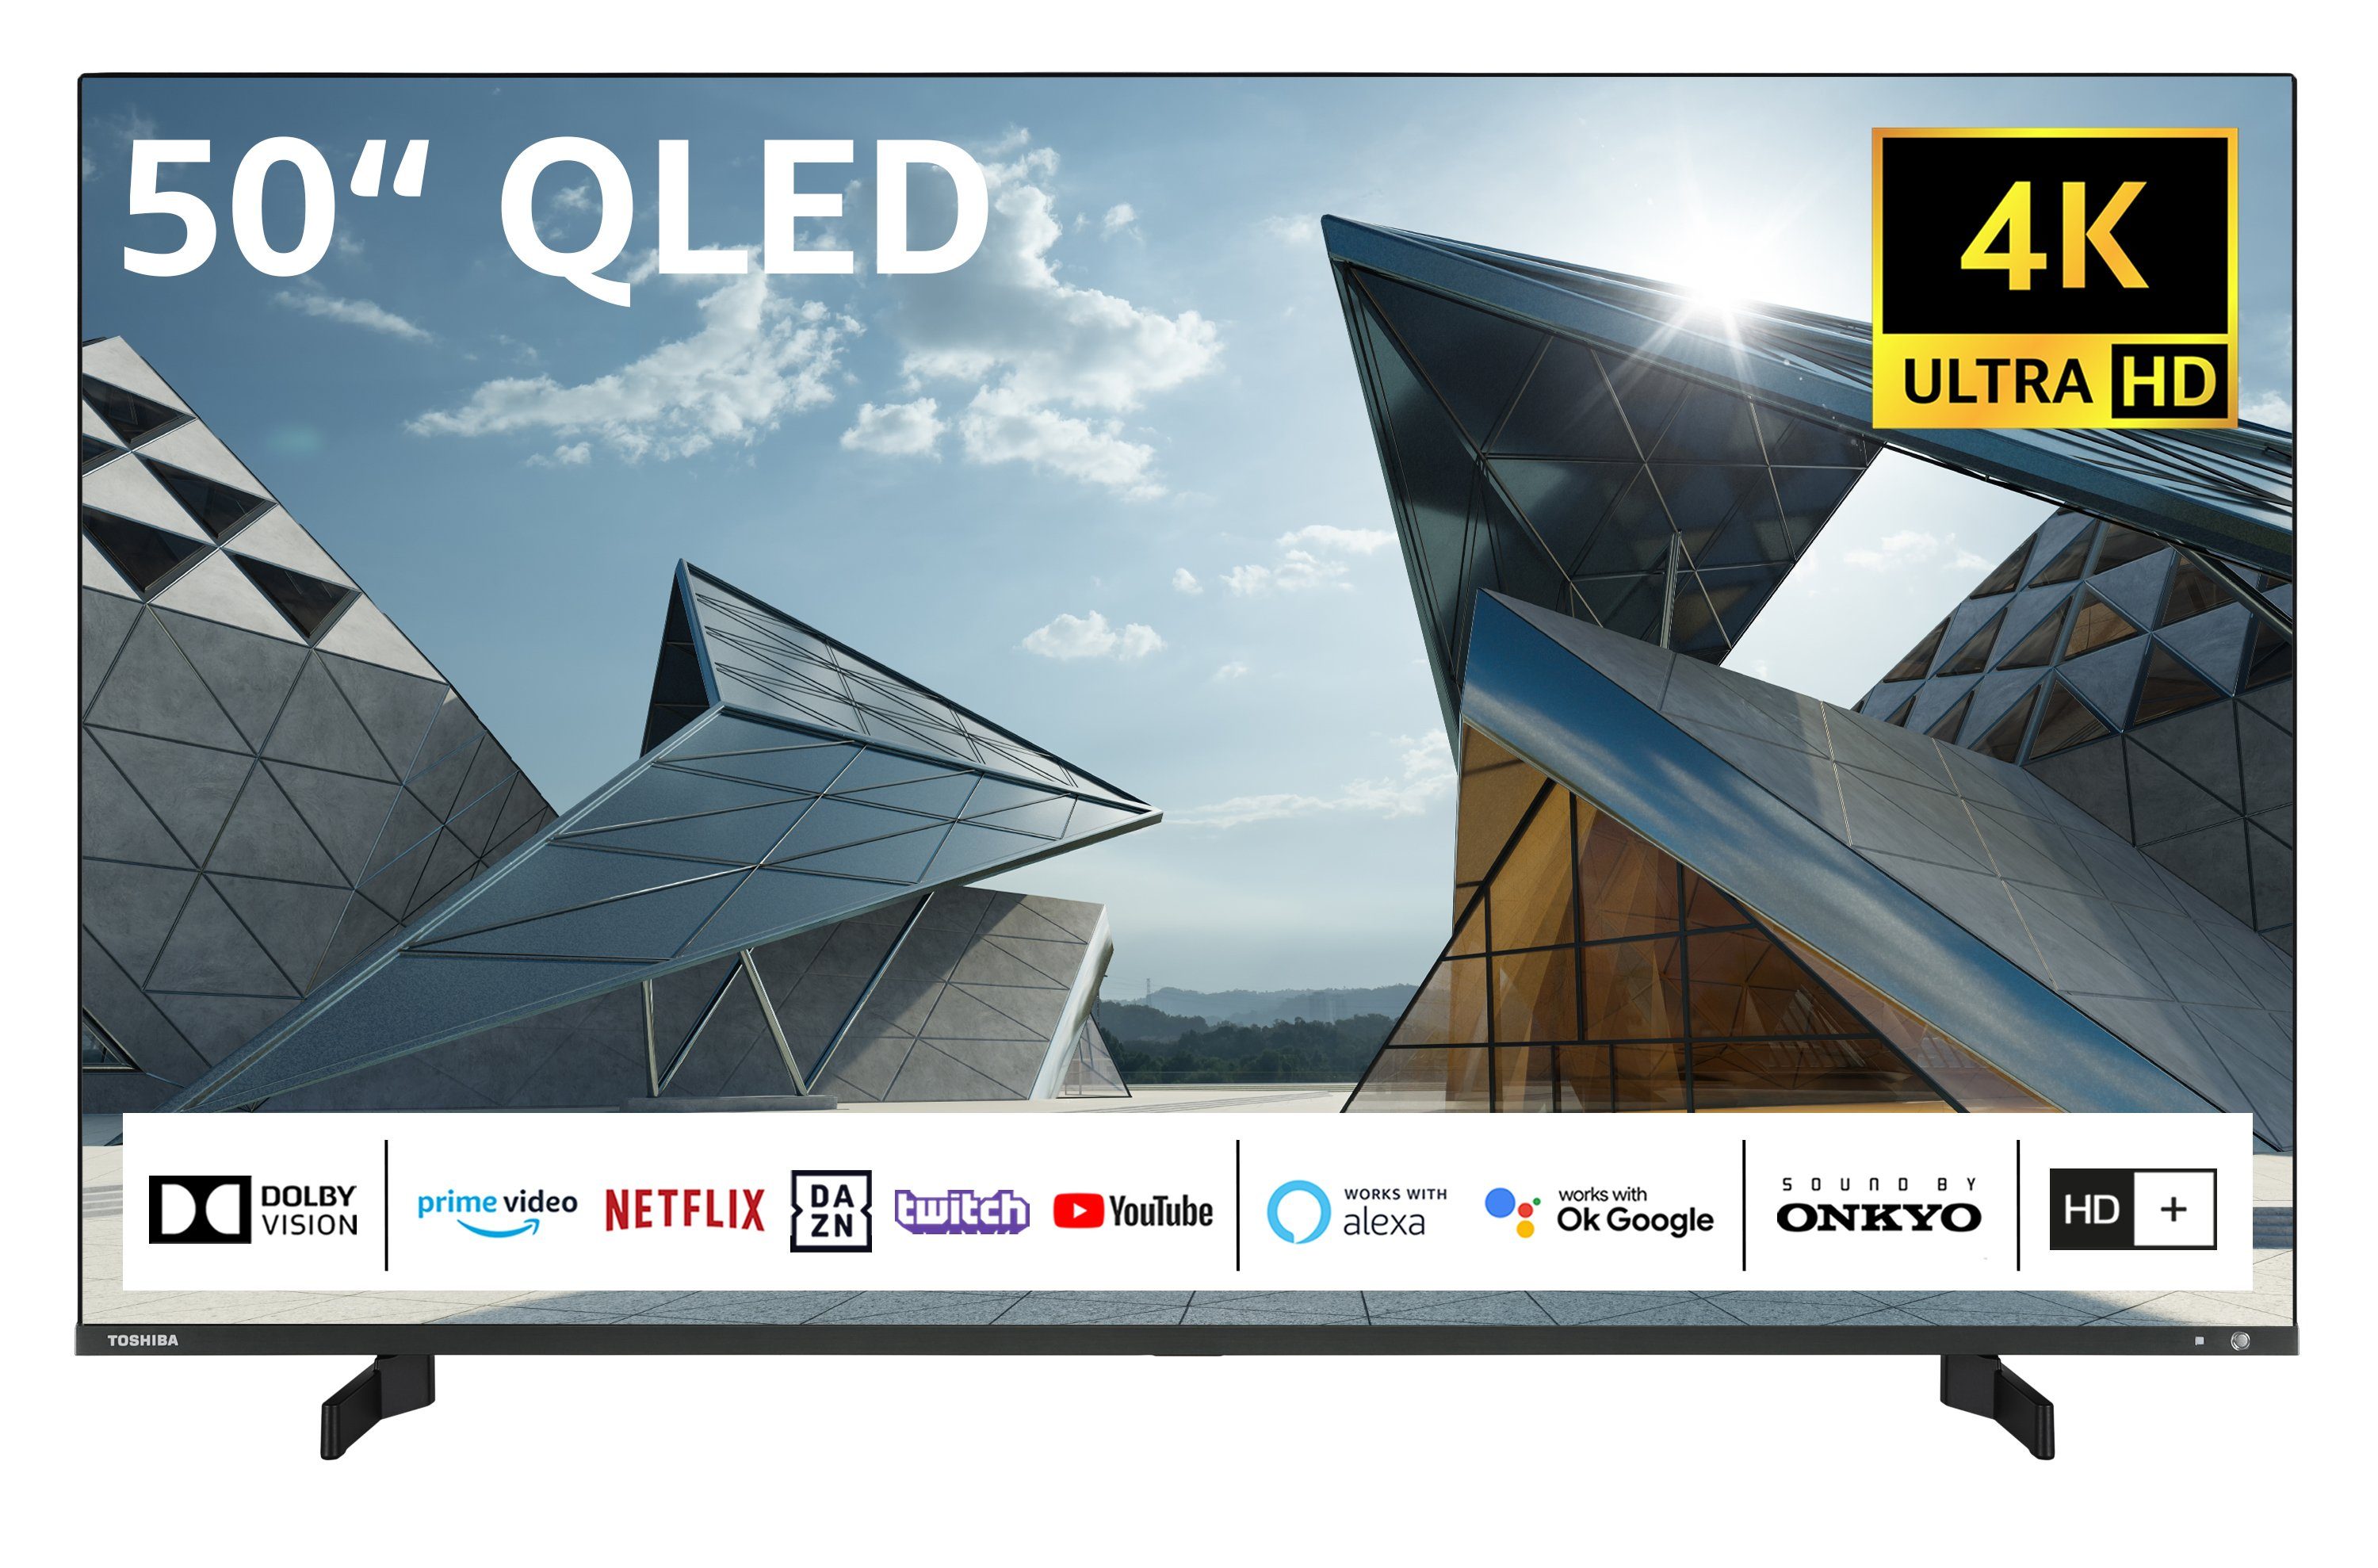 Toshiba 50QL5D63DAY QLED-Fernseher (126 cm/50 Zoll, 4K Ultra HD, Smart TV,  HDR Dolby Vision, Triple-Tuner, Sound by Onkyo - Inkl. 6 Monate HD)